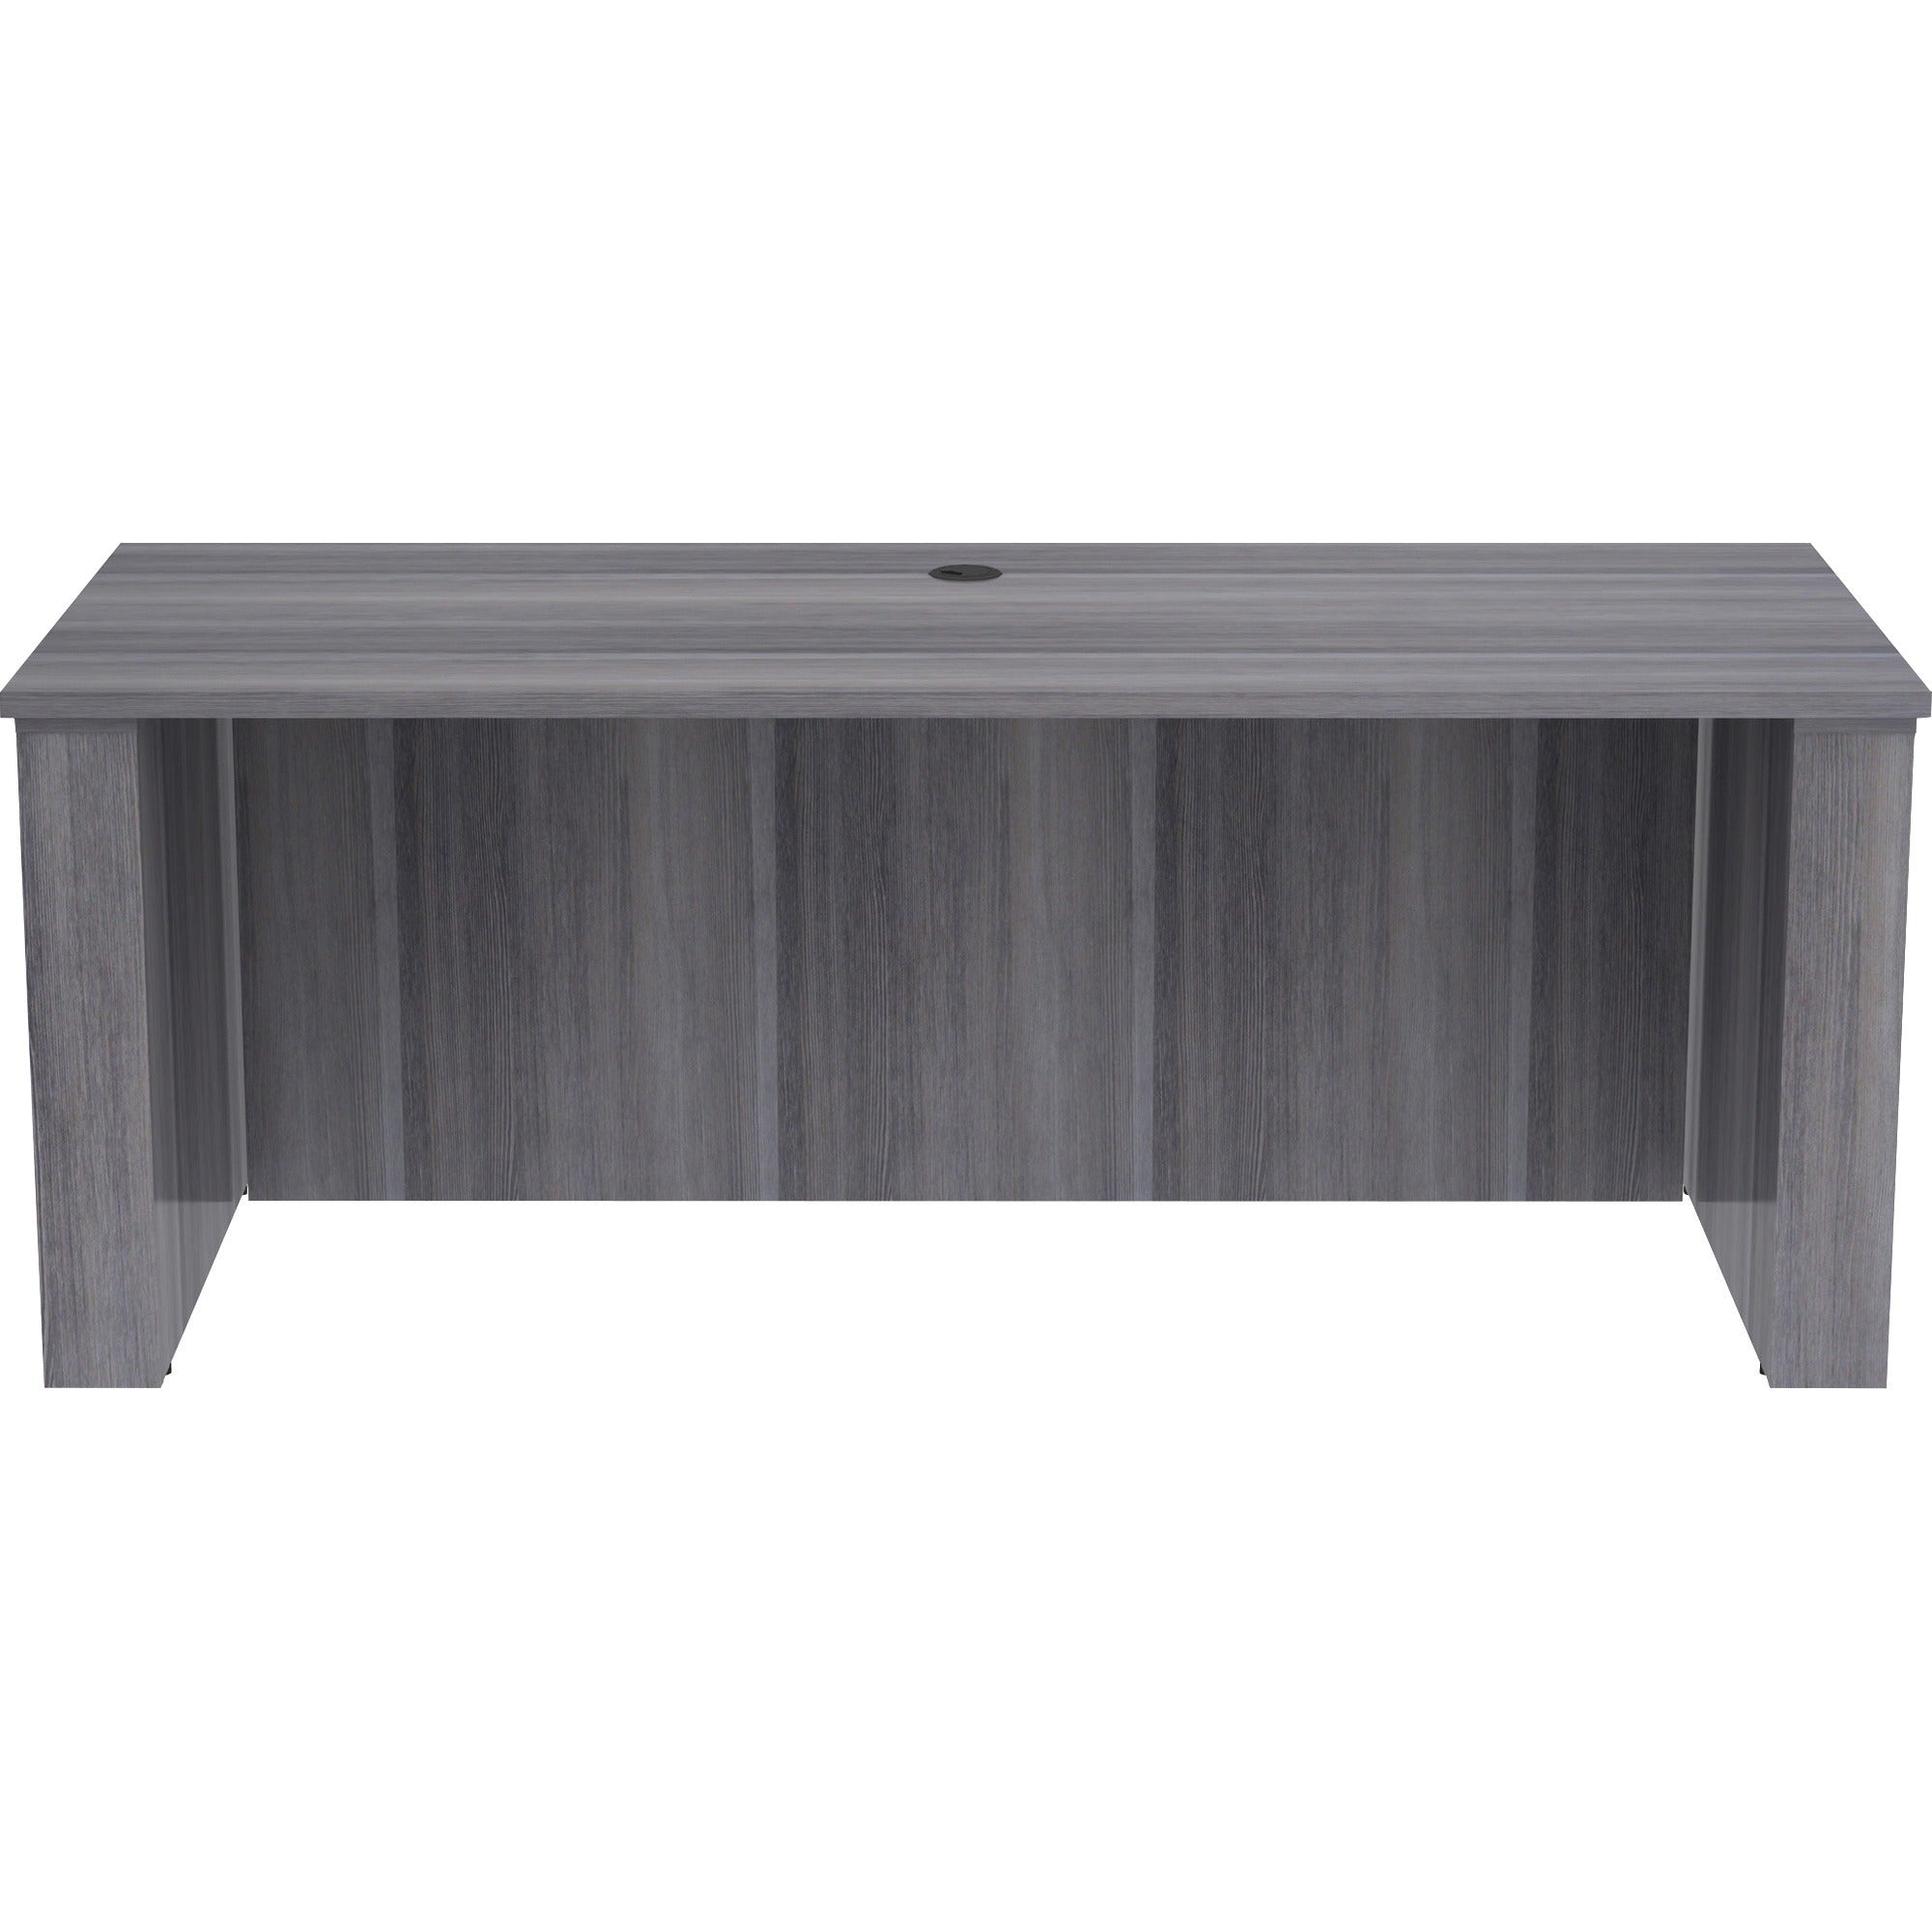 lorell-essentials-series-sit-to-stand-desk-shell-01-top-1-edge-72-x-2949-finish-weathered-charcoal-laminate-table-top_llr69578 - 2